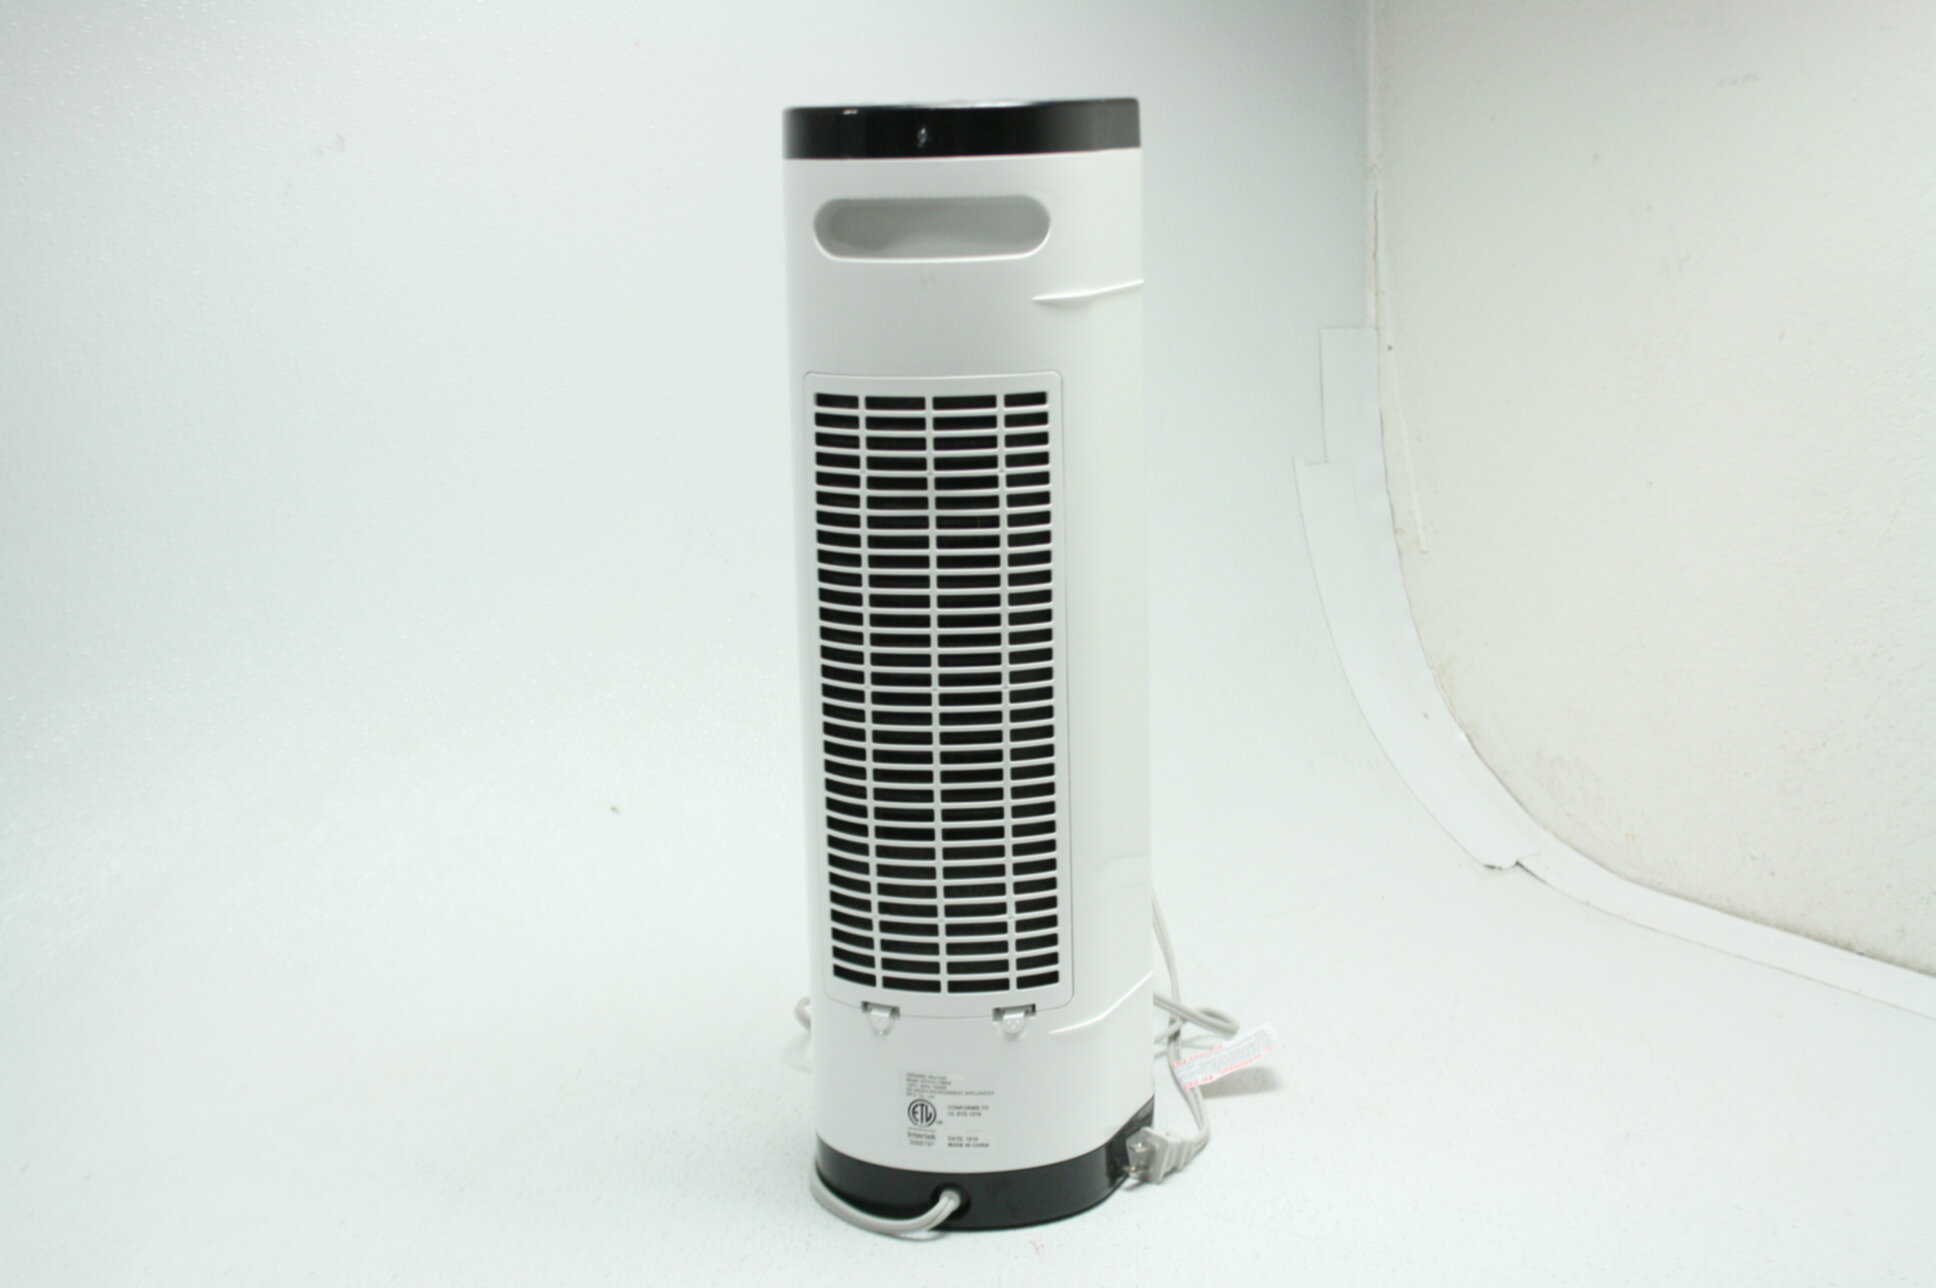 How To Fix A Pelonis Space Heater?